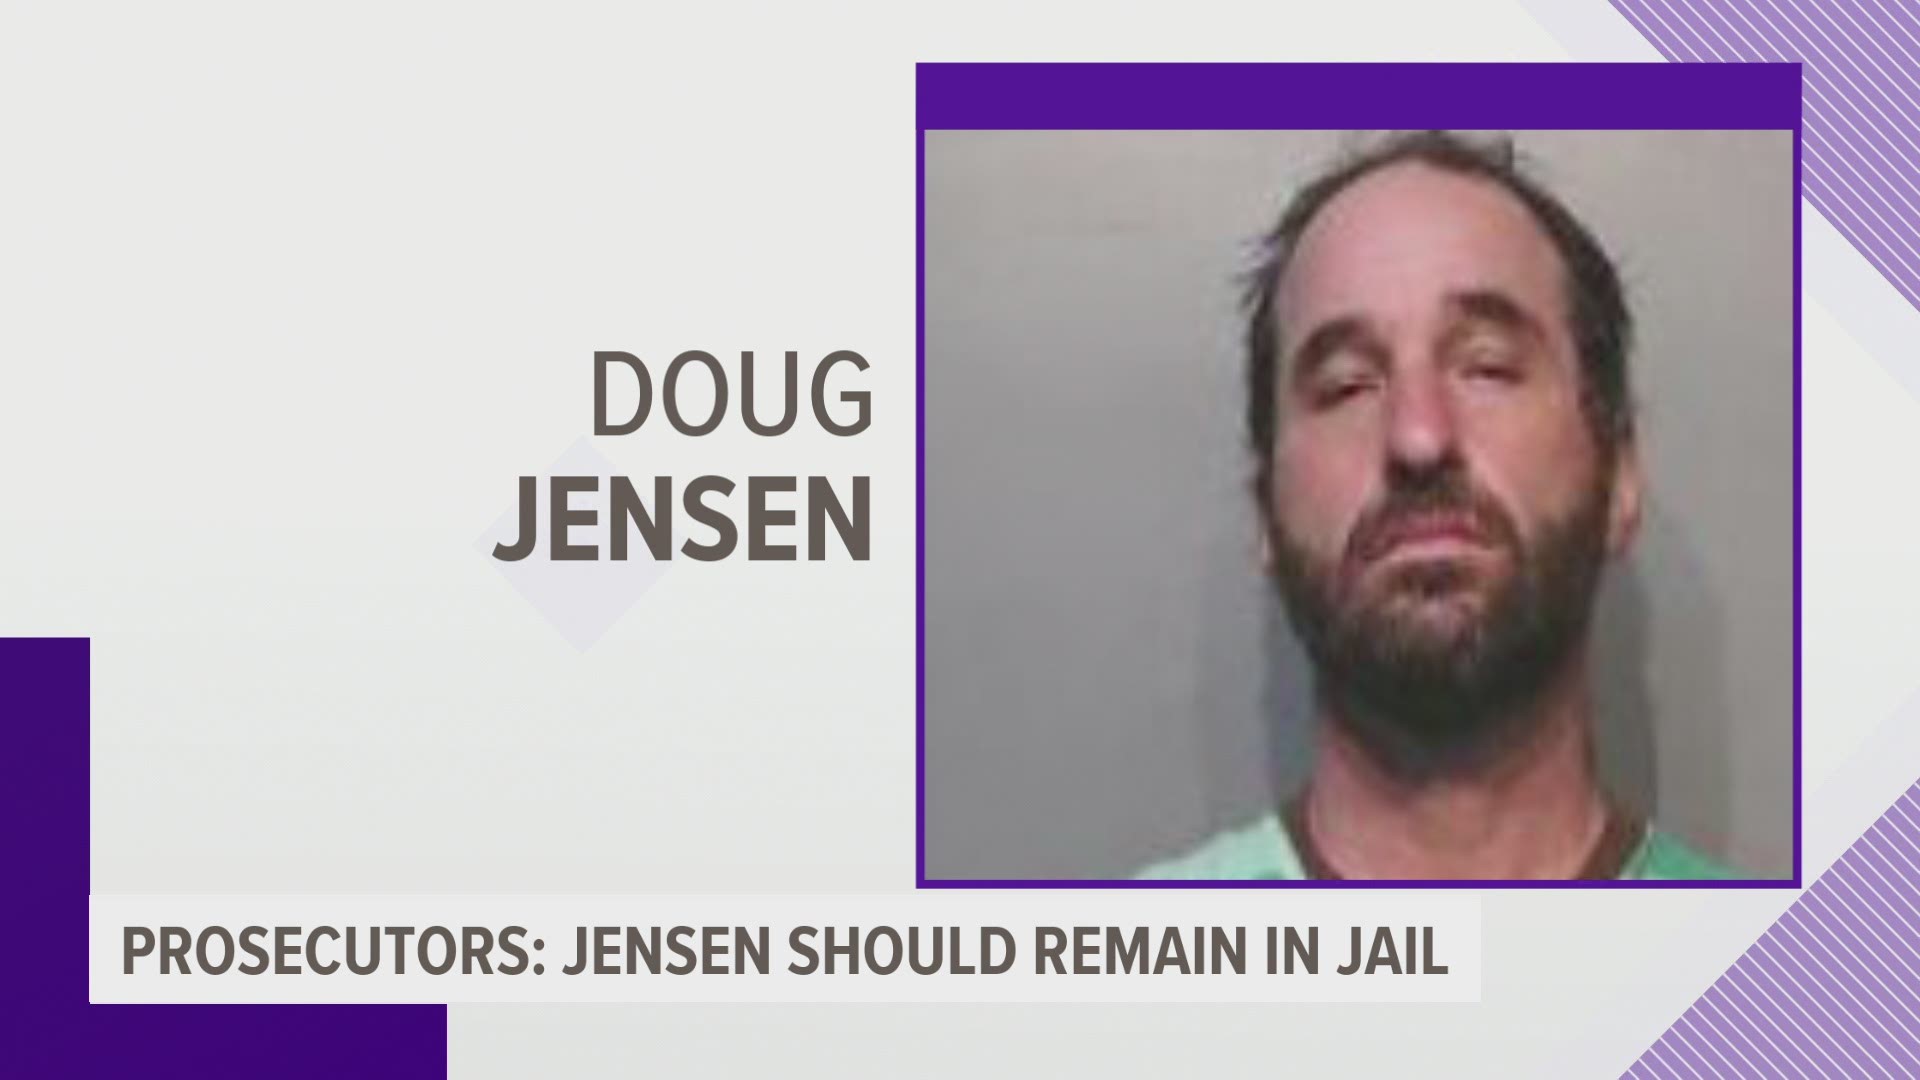 Doug Jensen's defense team argued he should be released from jail as he waits for trial.